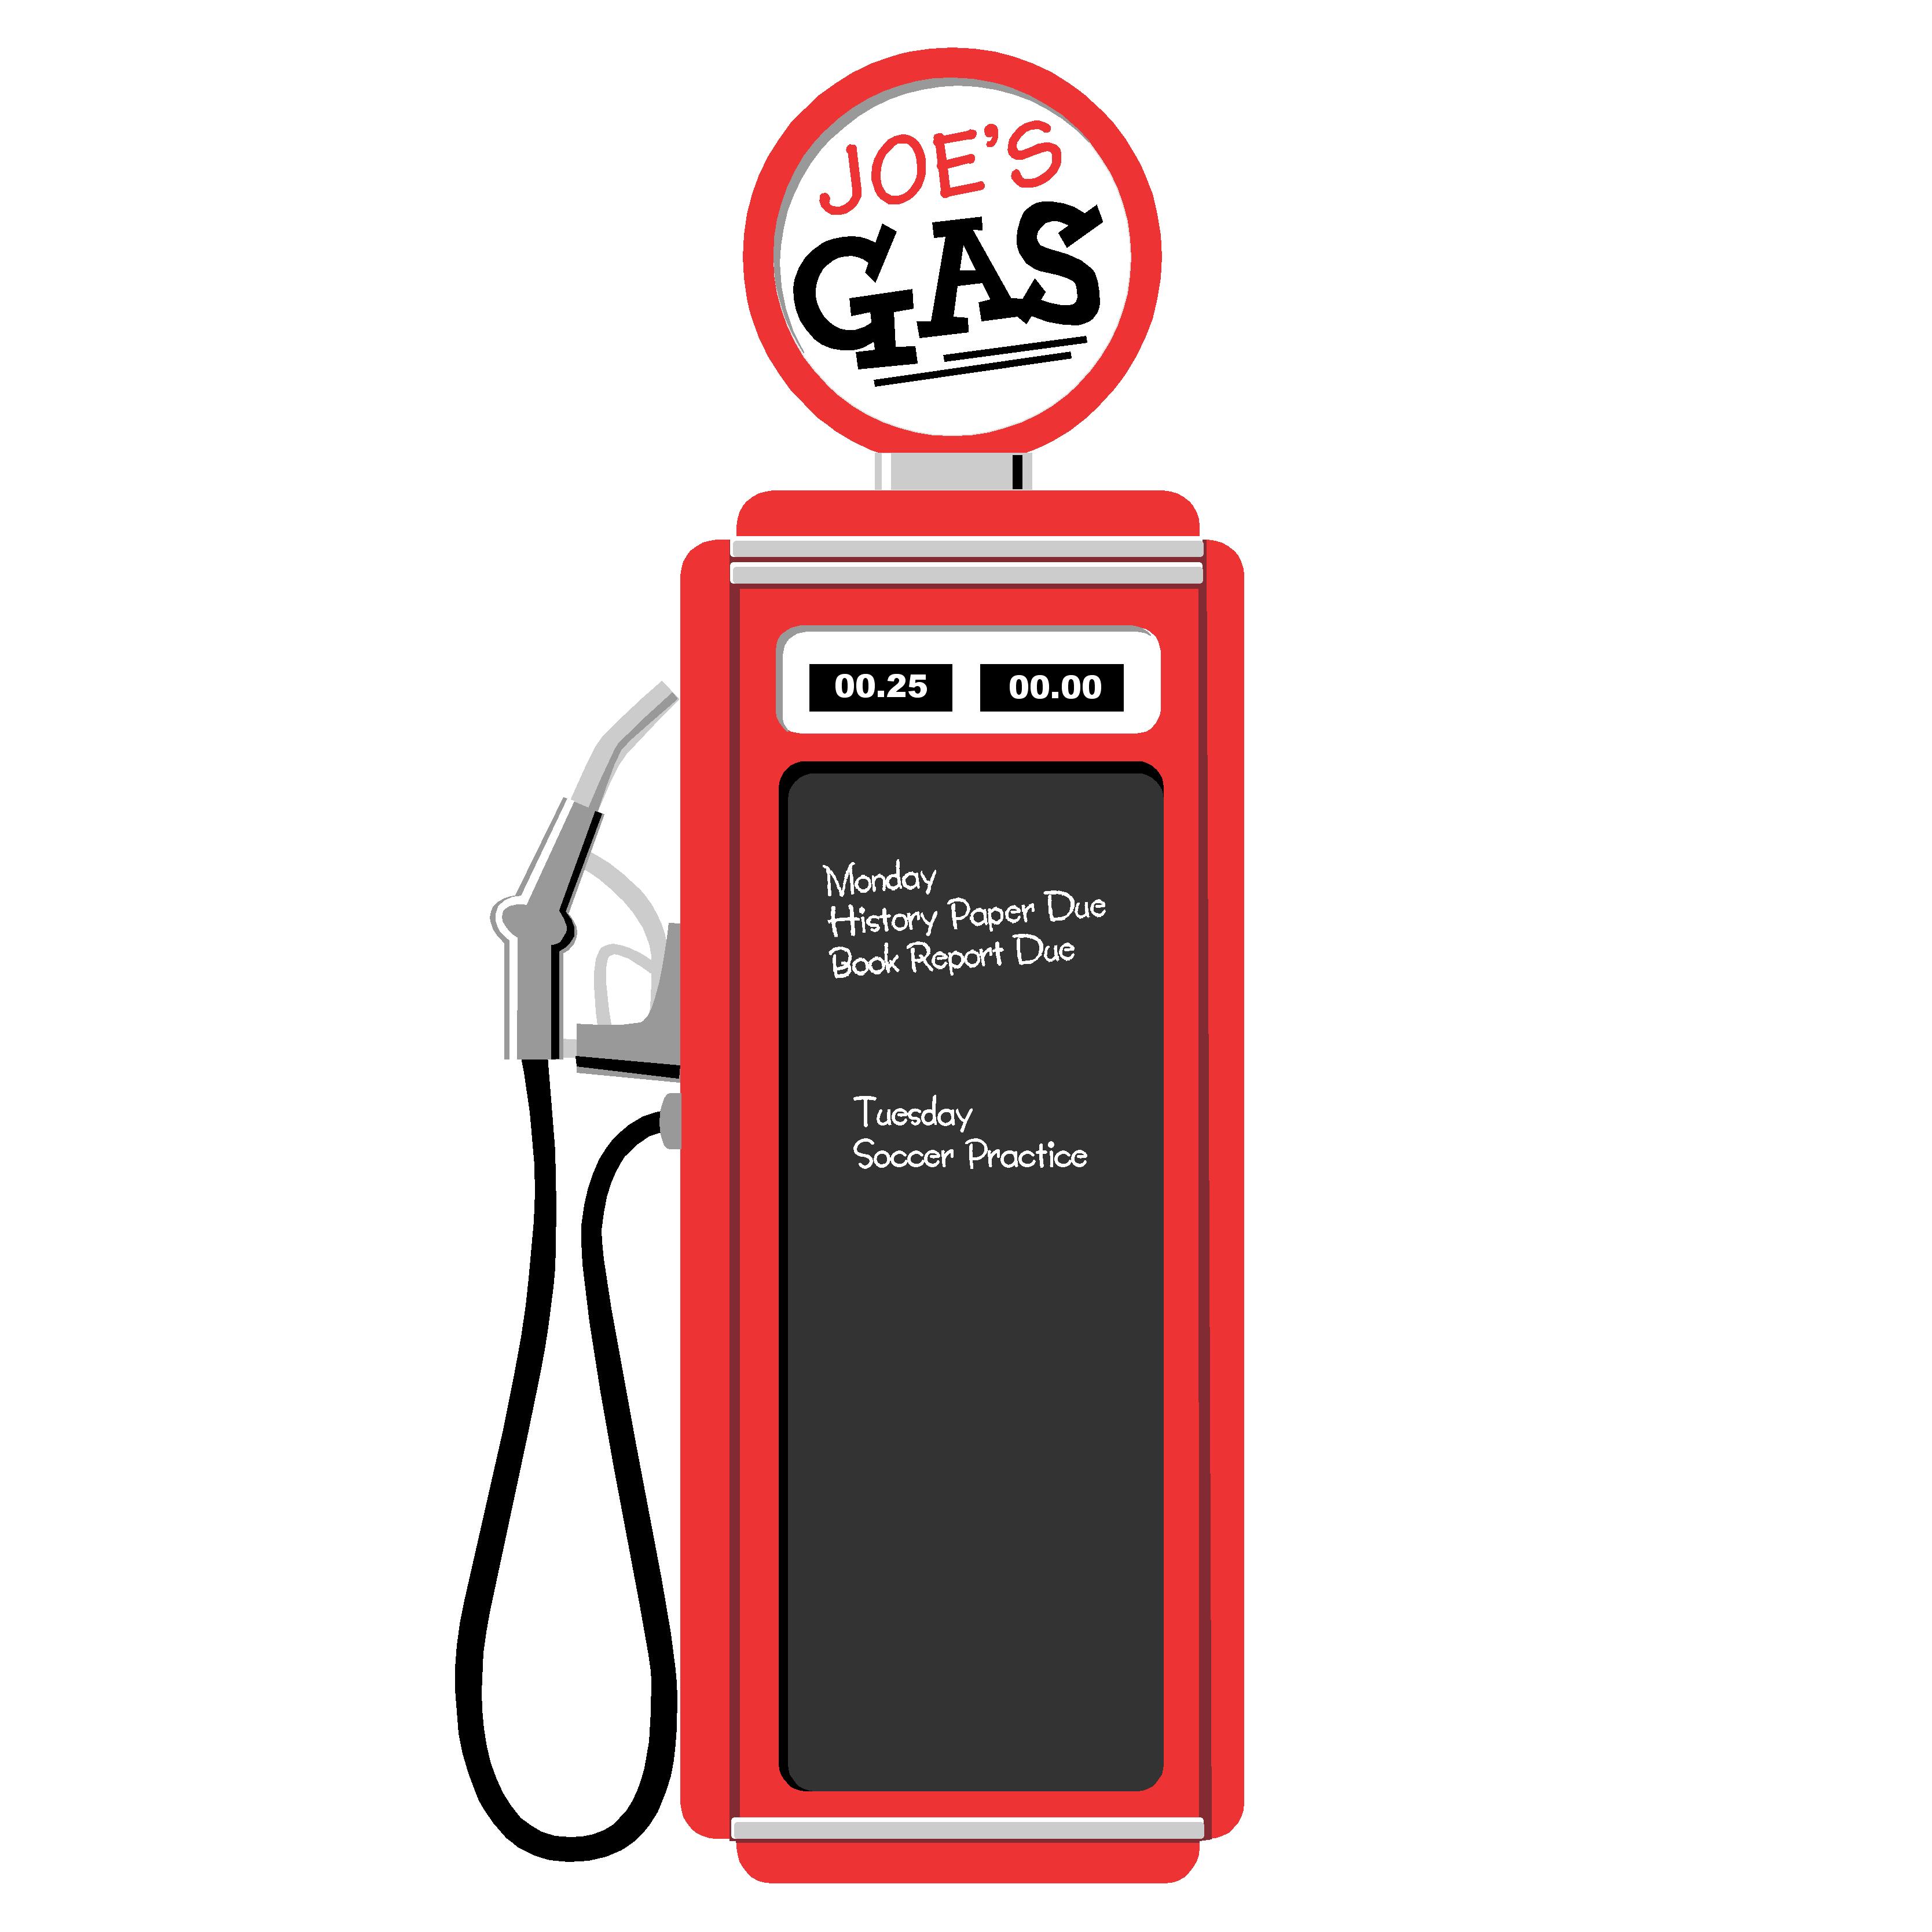 Images For Gas Pump Png - Gas Pump, Transparent background PNG HD thumbnail